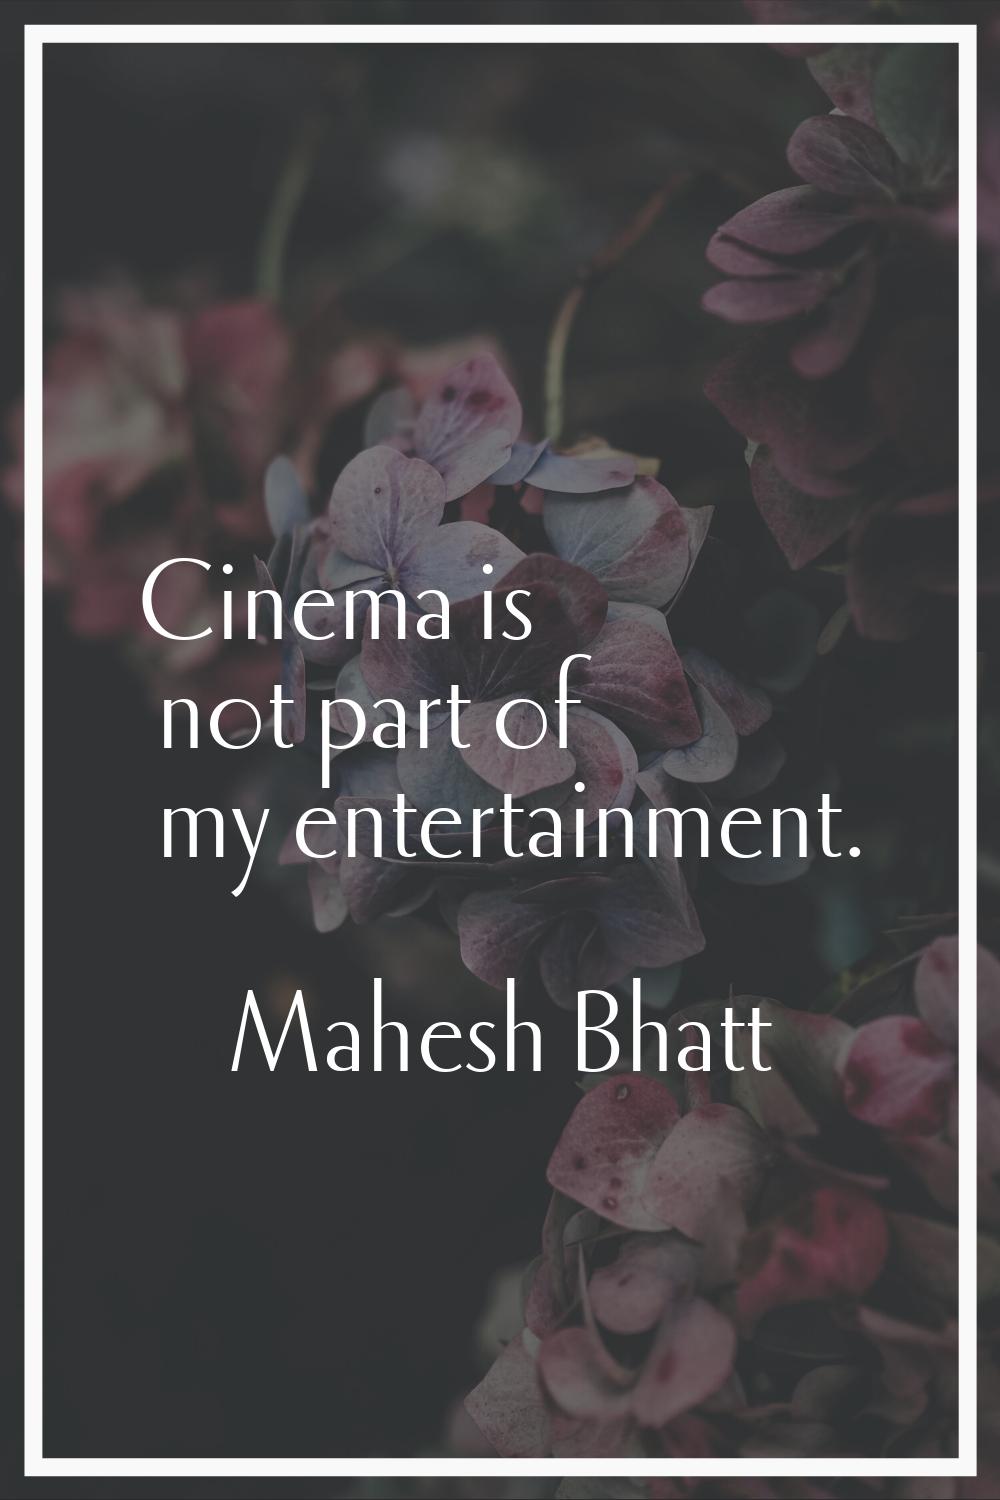 Cinema is not part of my entertainment.